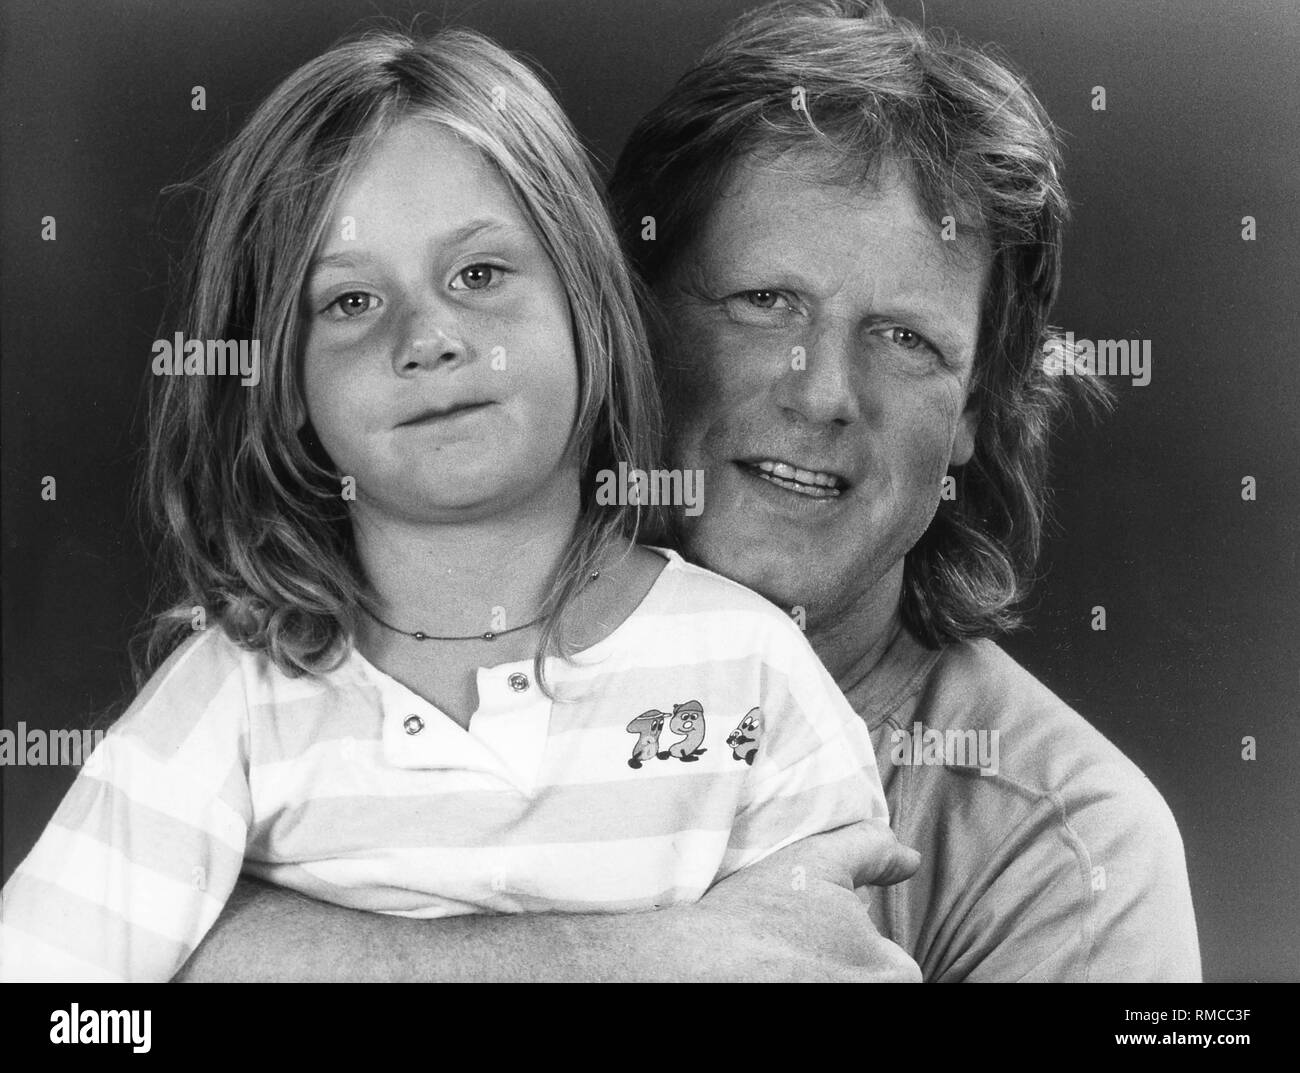 Schlager singer Gunter Gabriel with his four year old daughter Lisamarie. Stock Photo